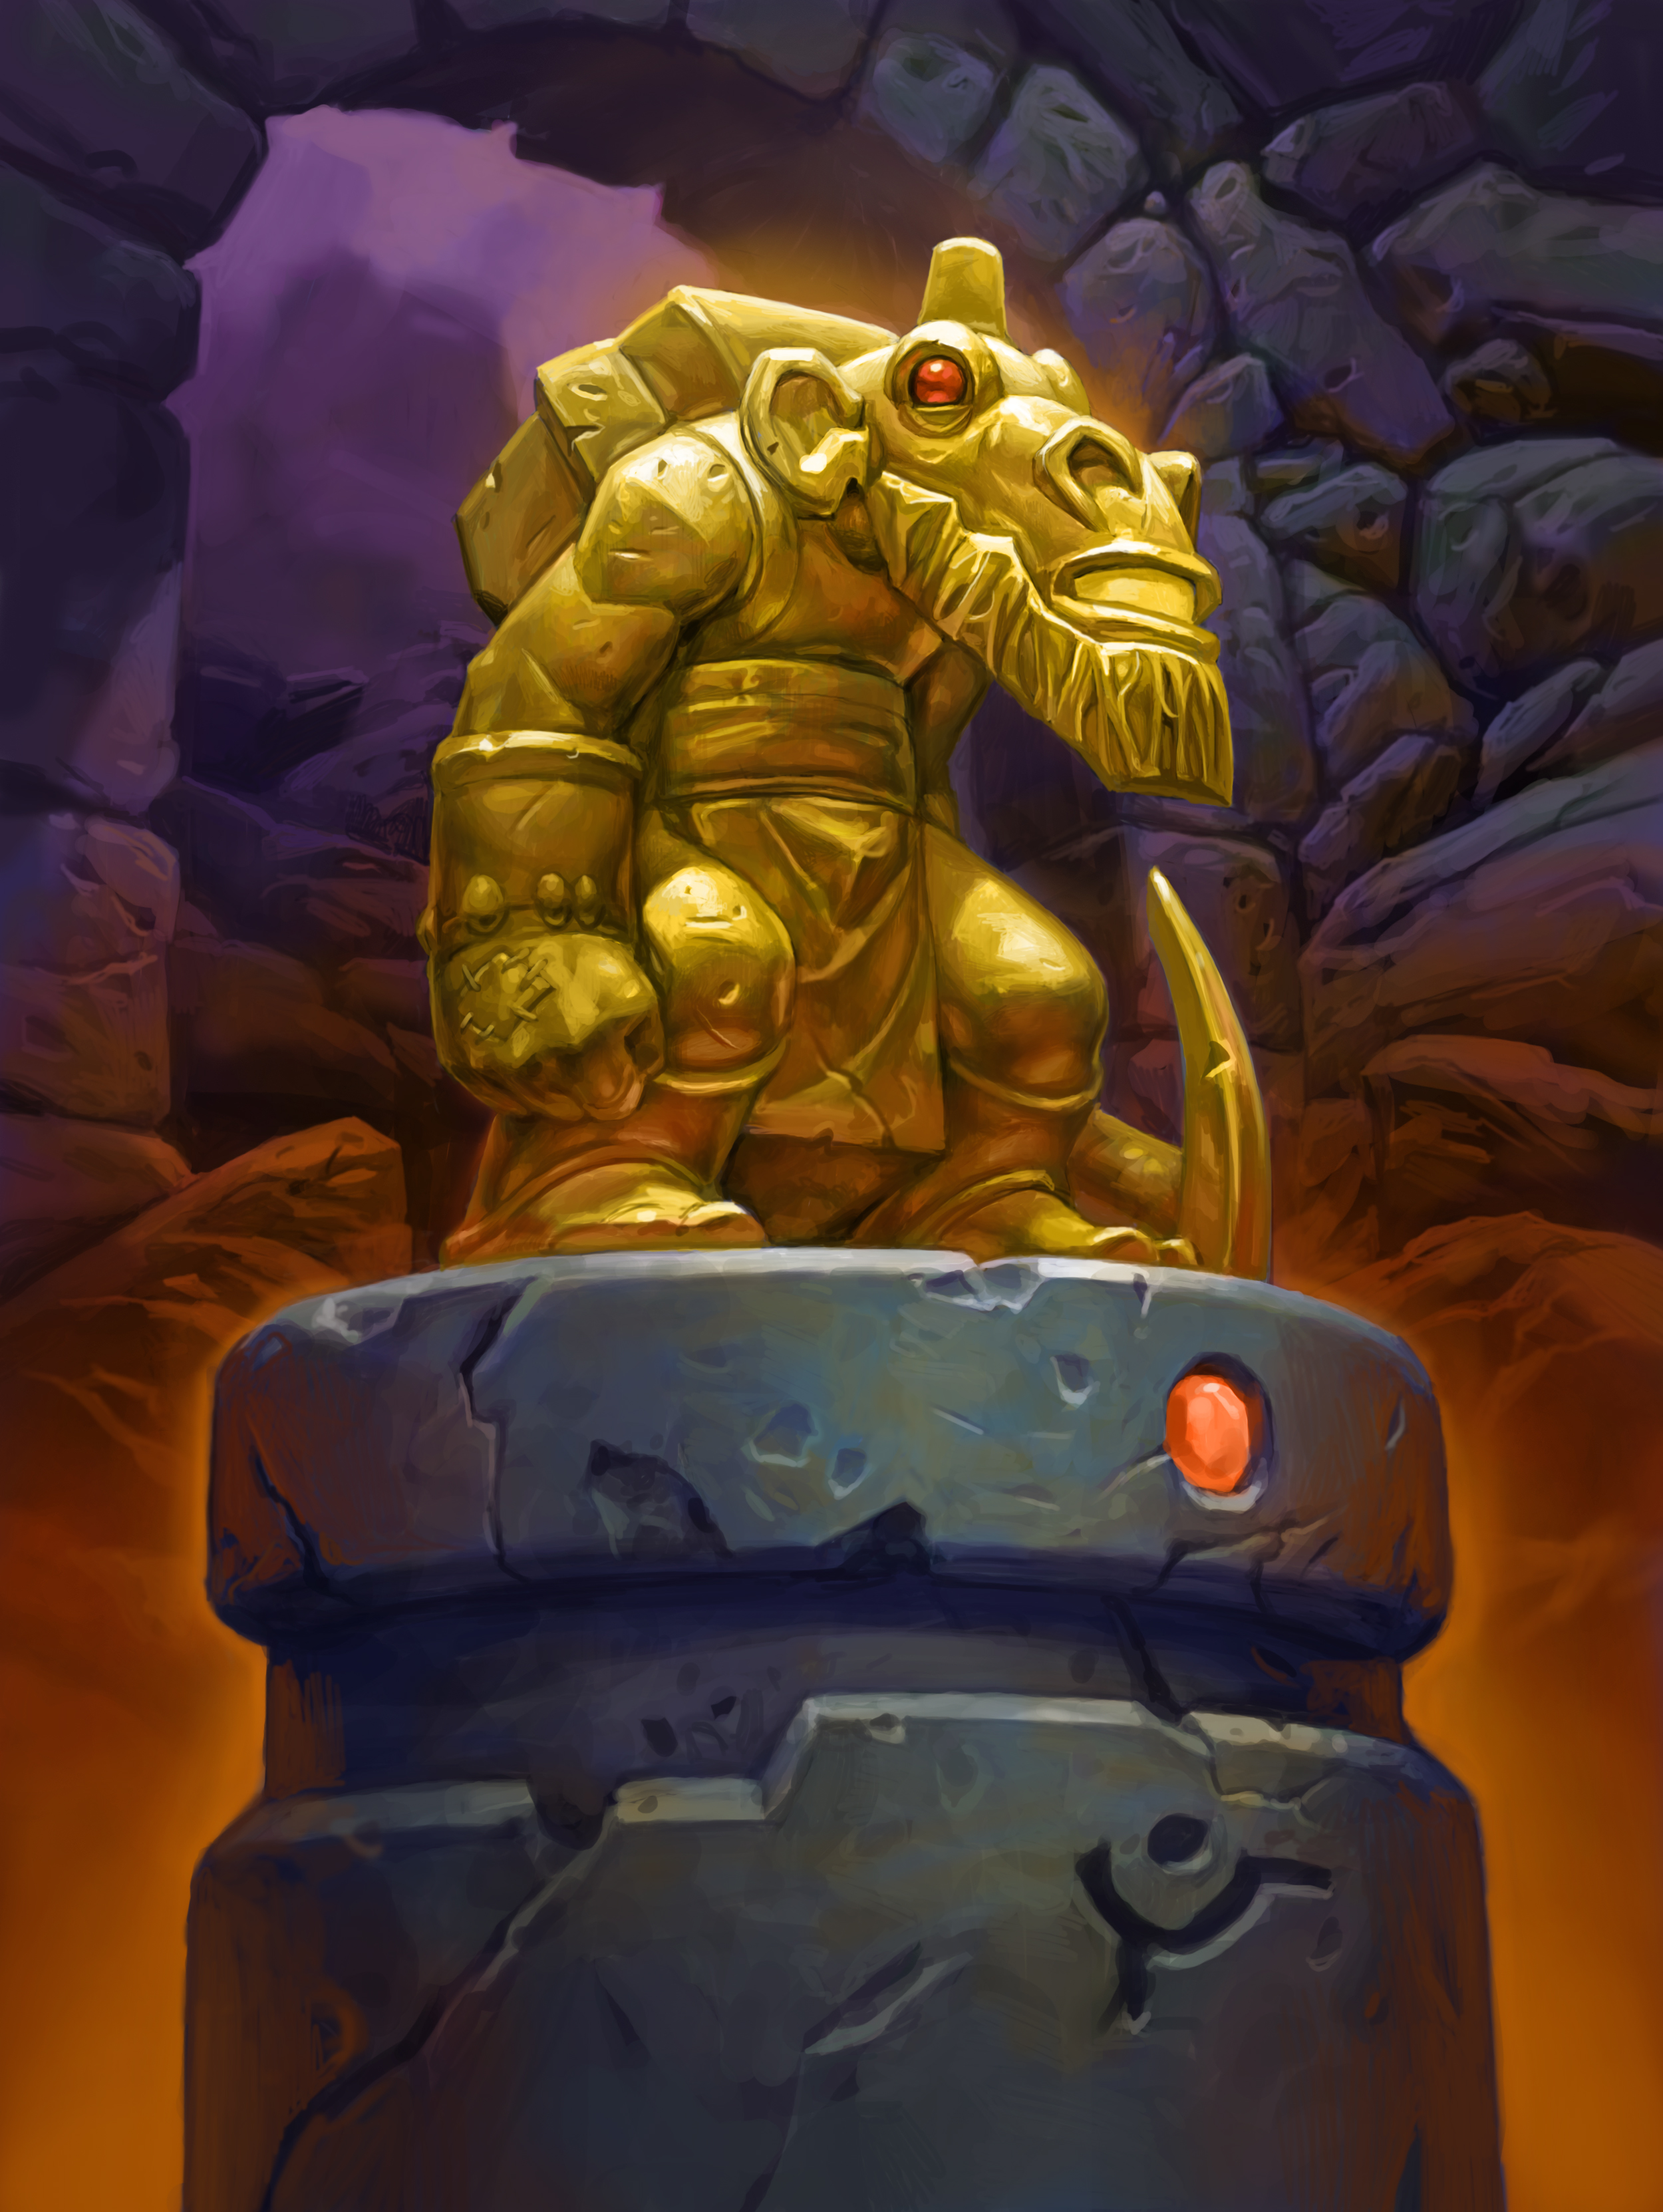 Hearthstone Heroes Of Warcraft Hearthstone Kobolds And Catacombs PC Gaming Video Games 2500x3325